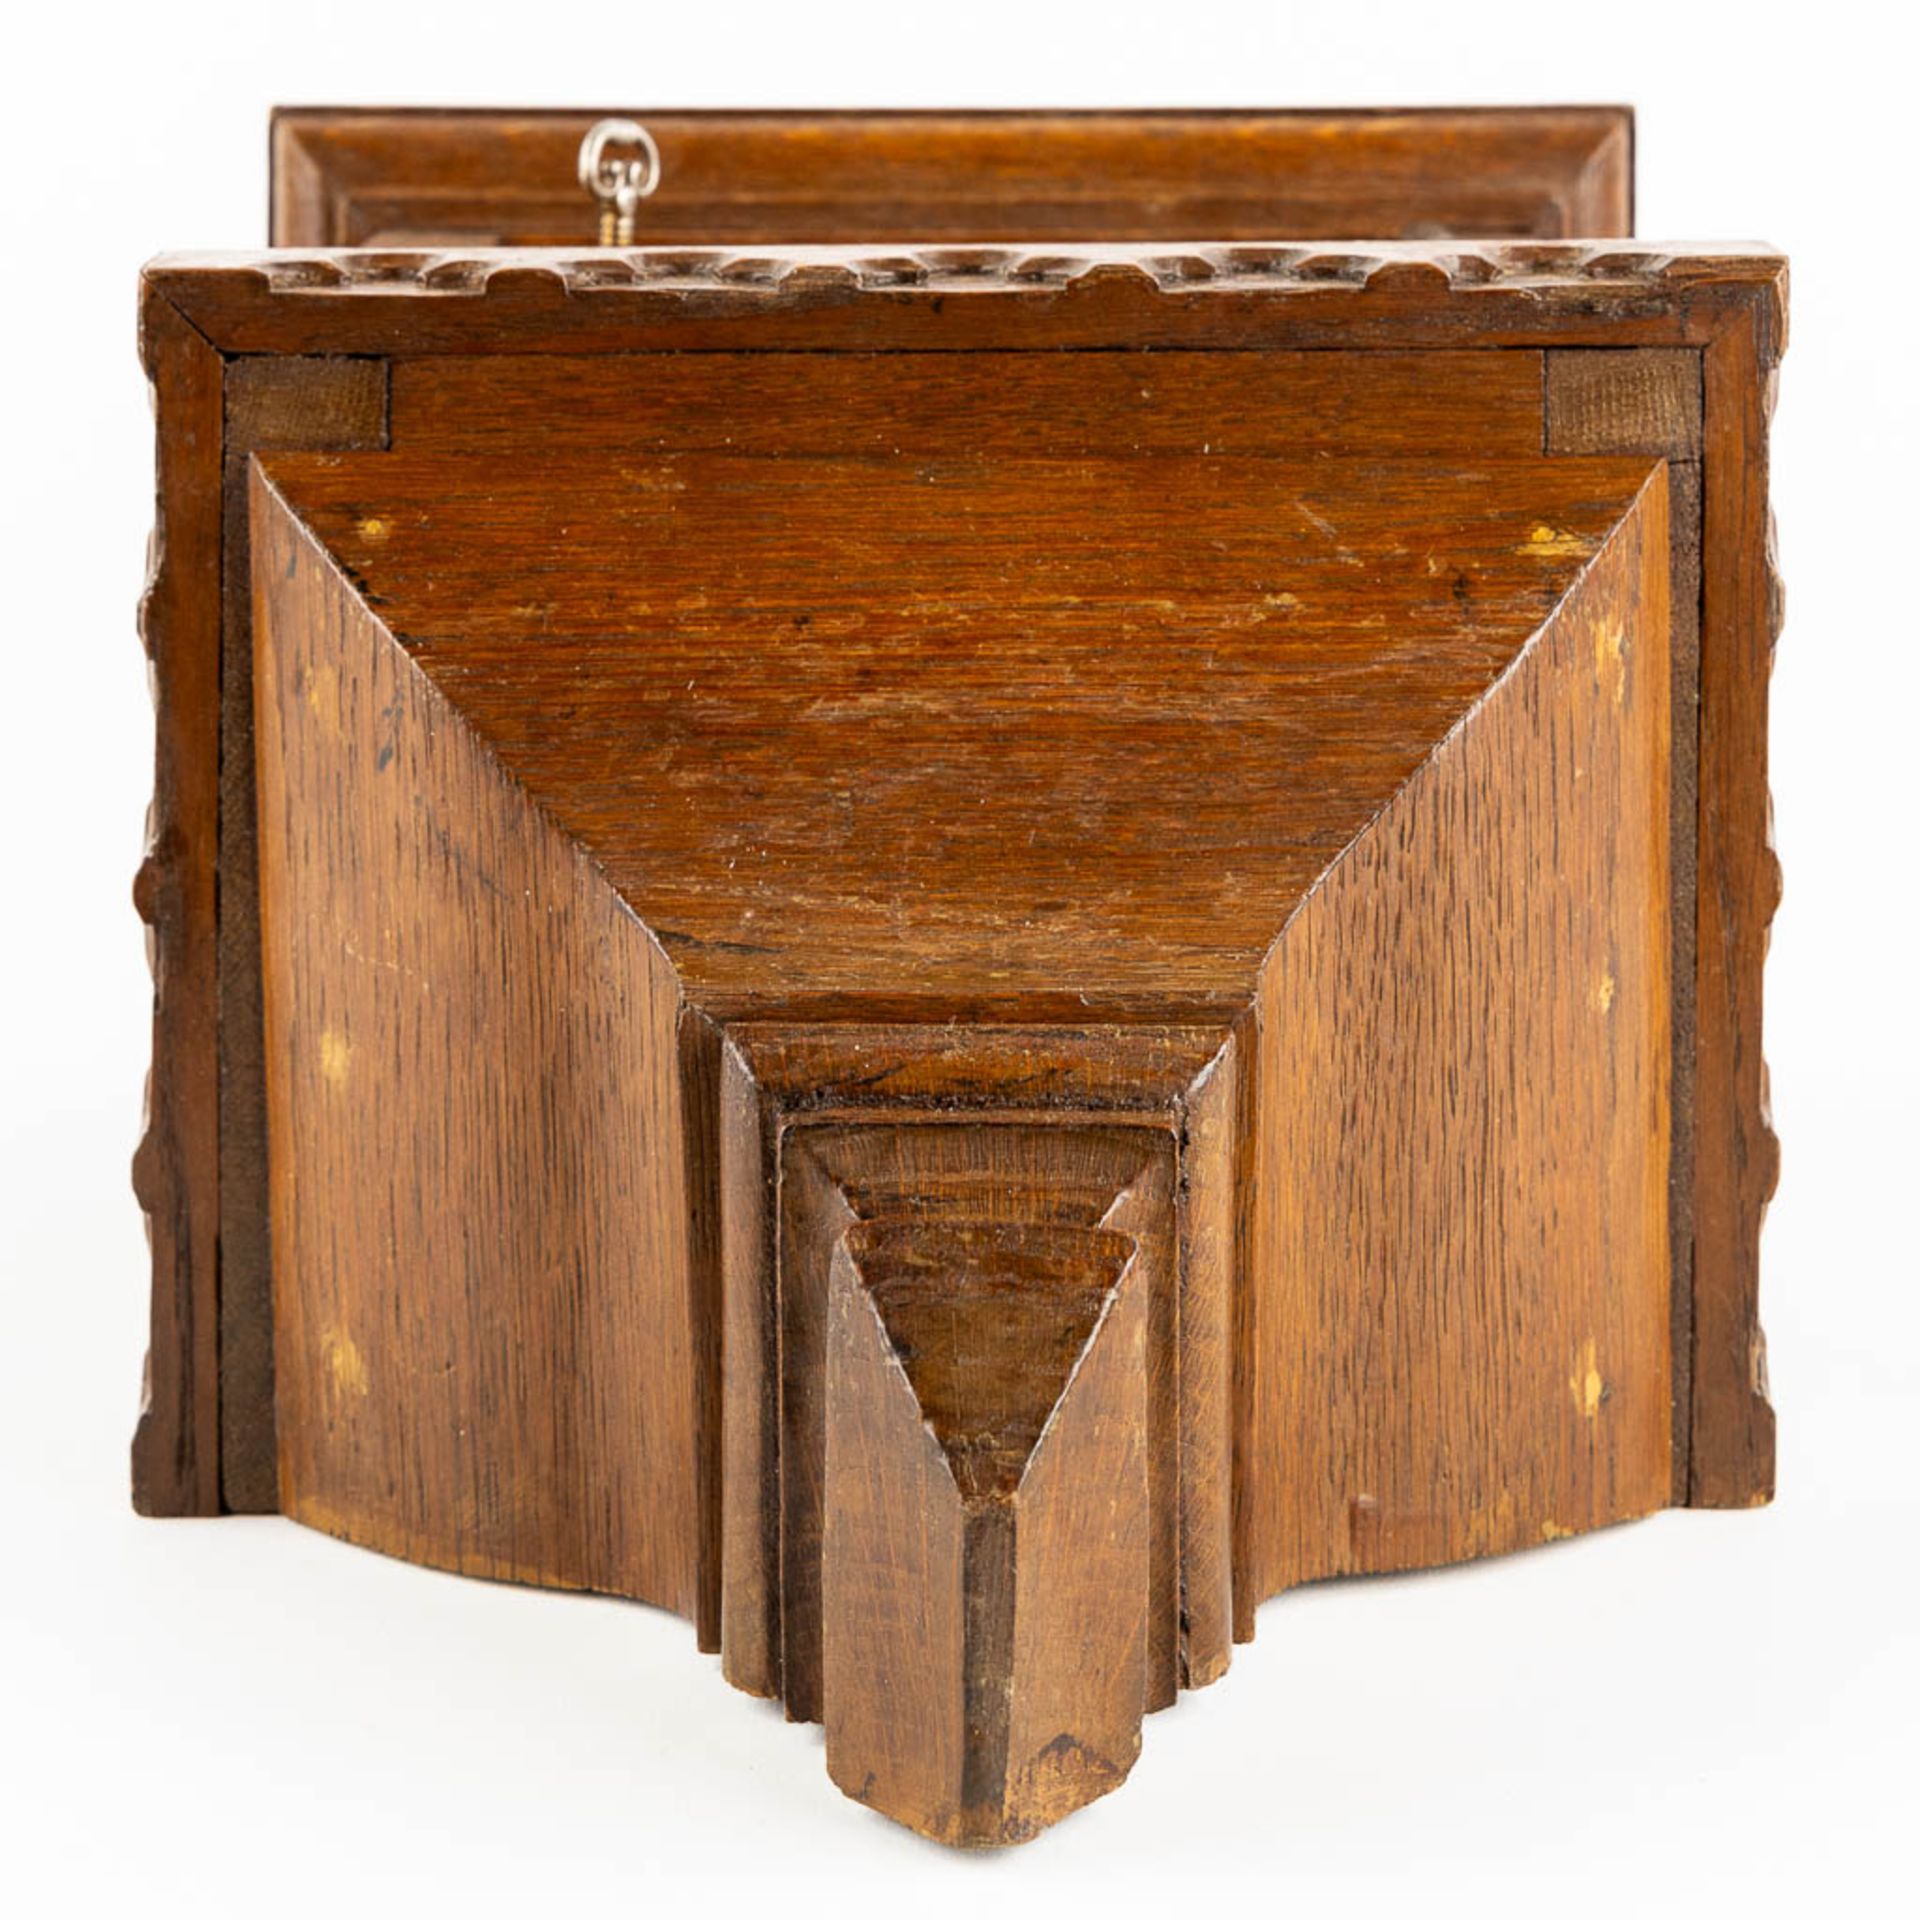 An Offertory or Poor box, sculptured oak, gothic revival. (L:20 x W:27 x H:42 cm) - Image 9 of 11